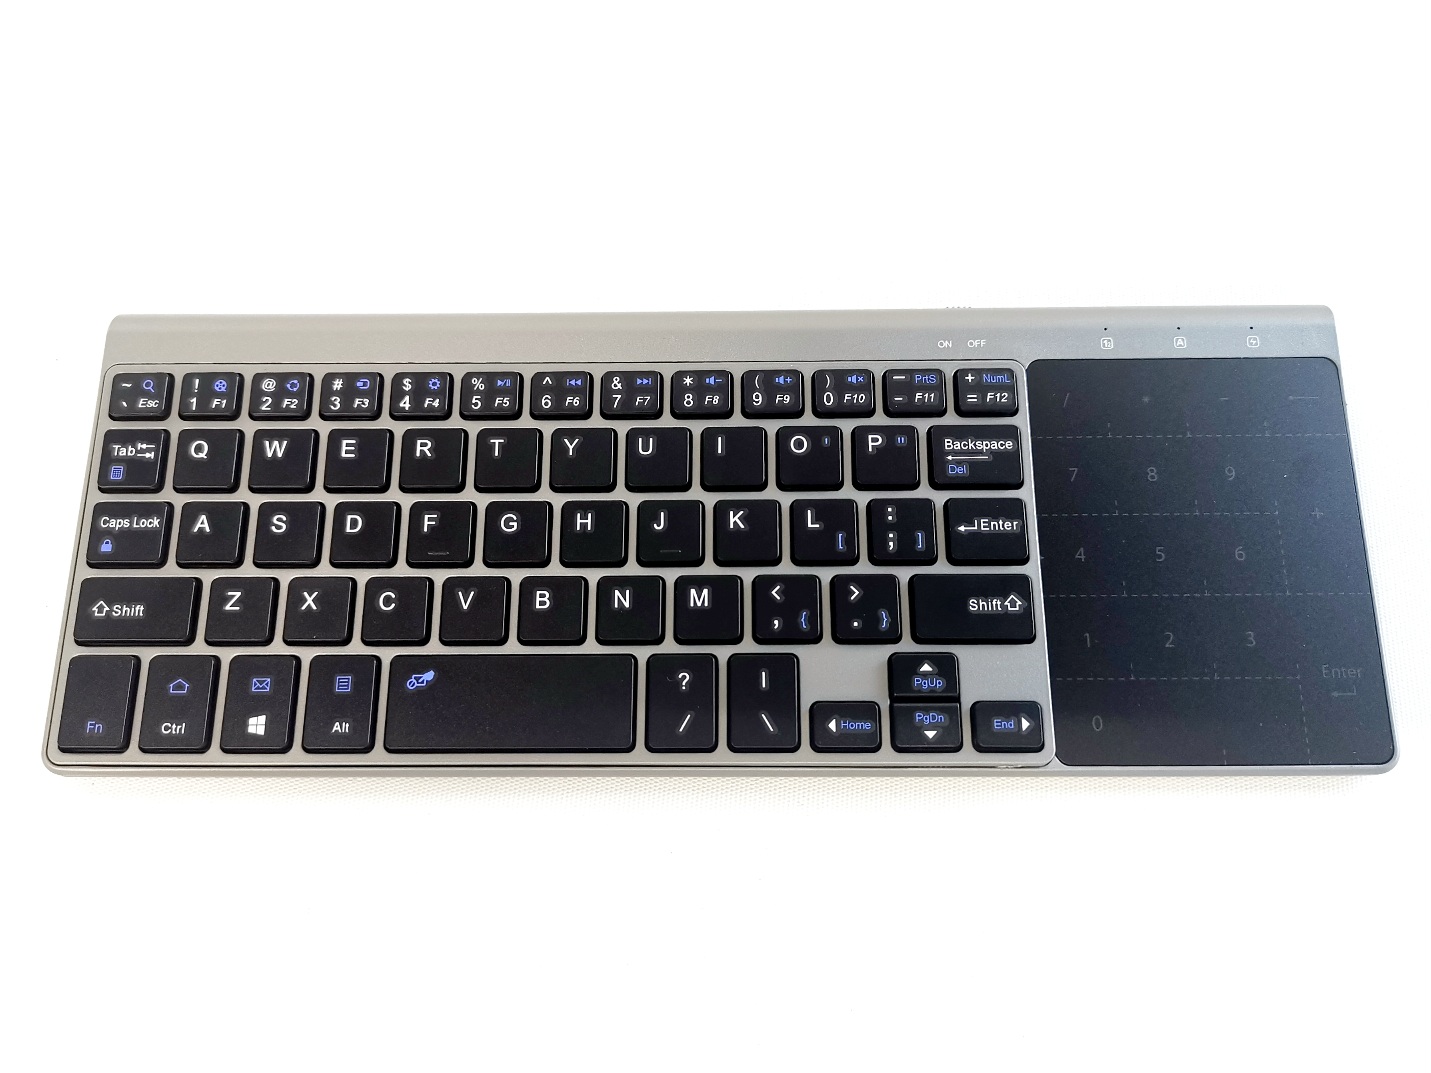 2.4G Wireless Mini Keyboard with Numeric Touchpad